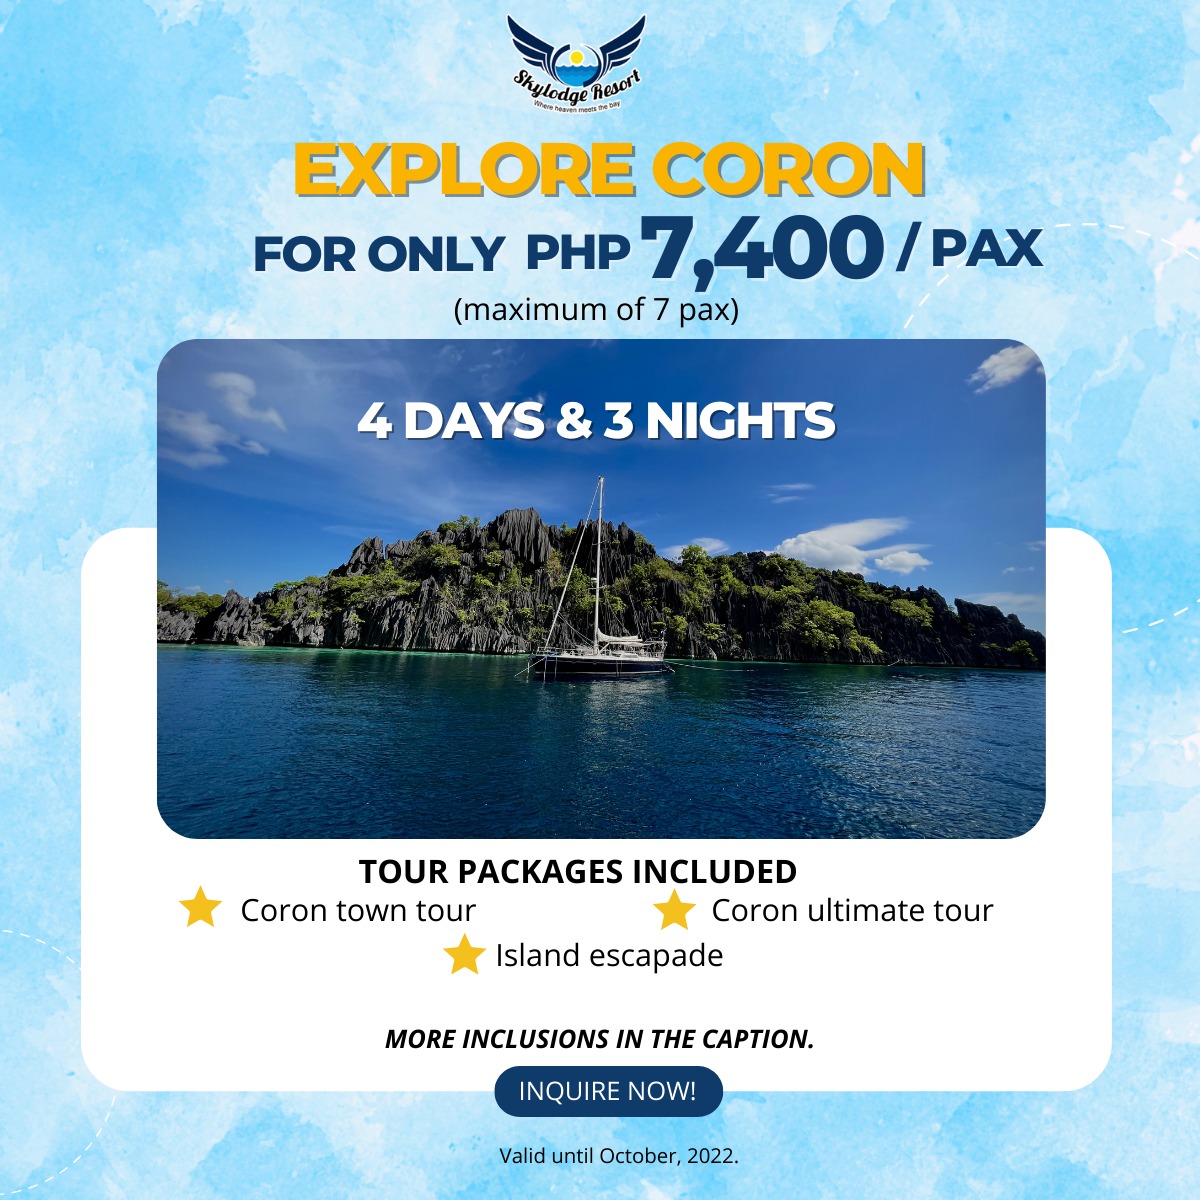 tour package to palawan